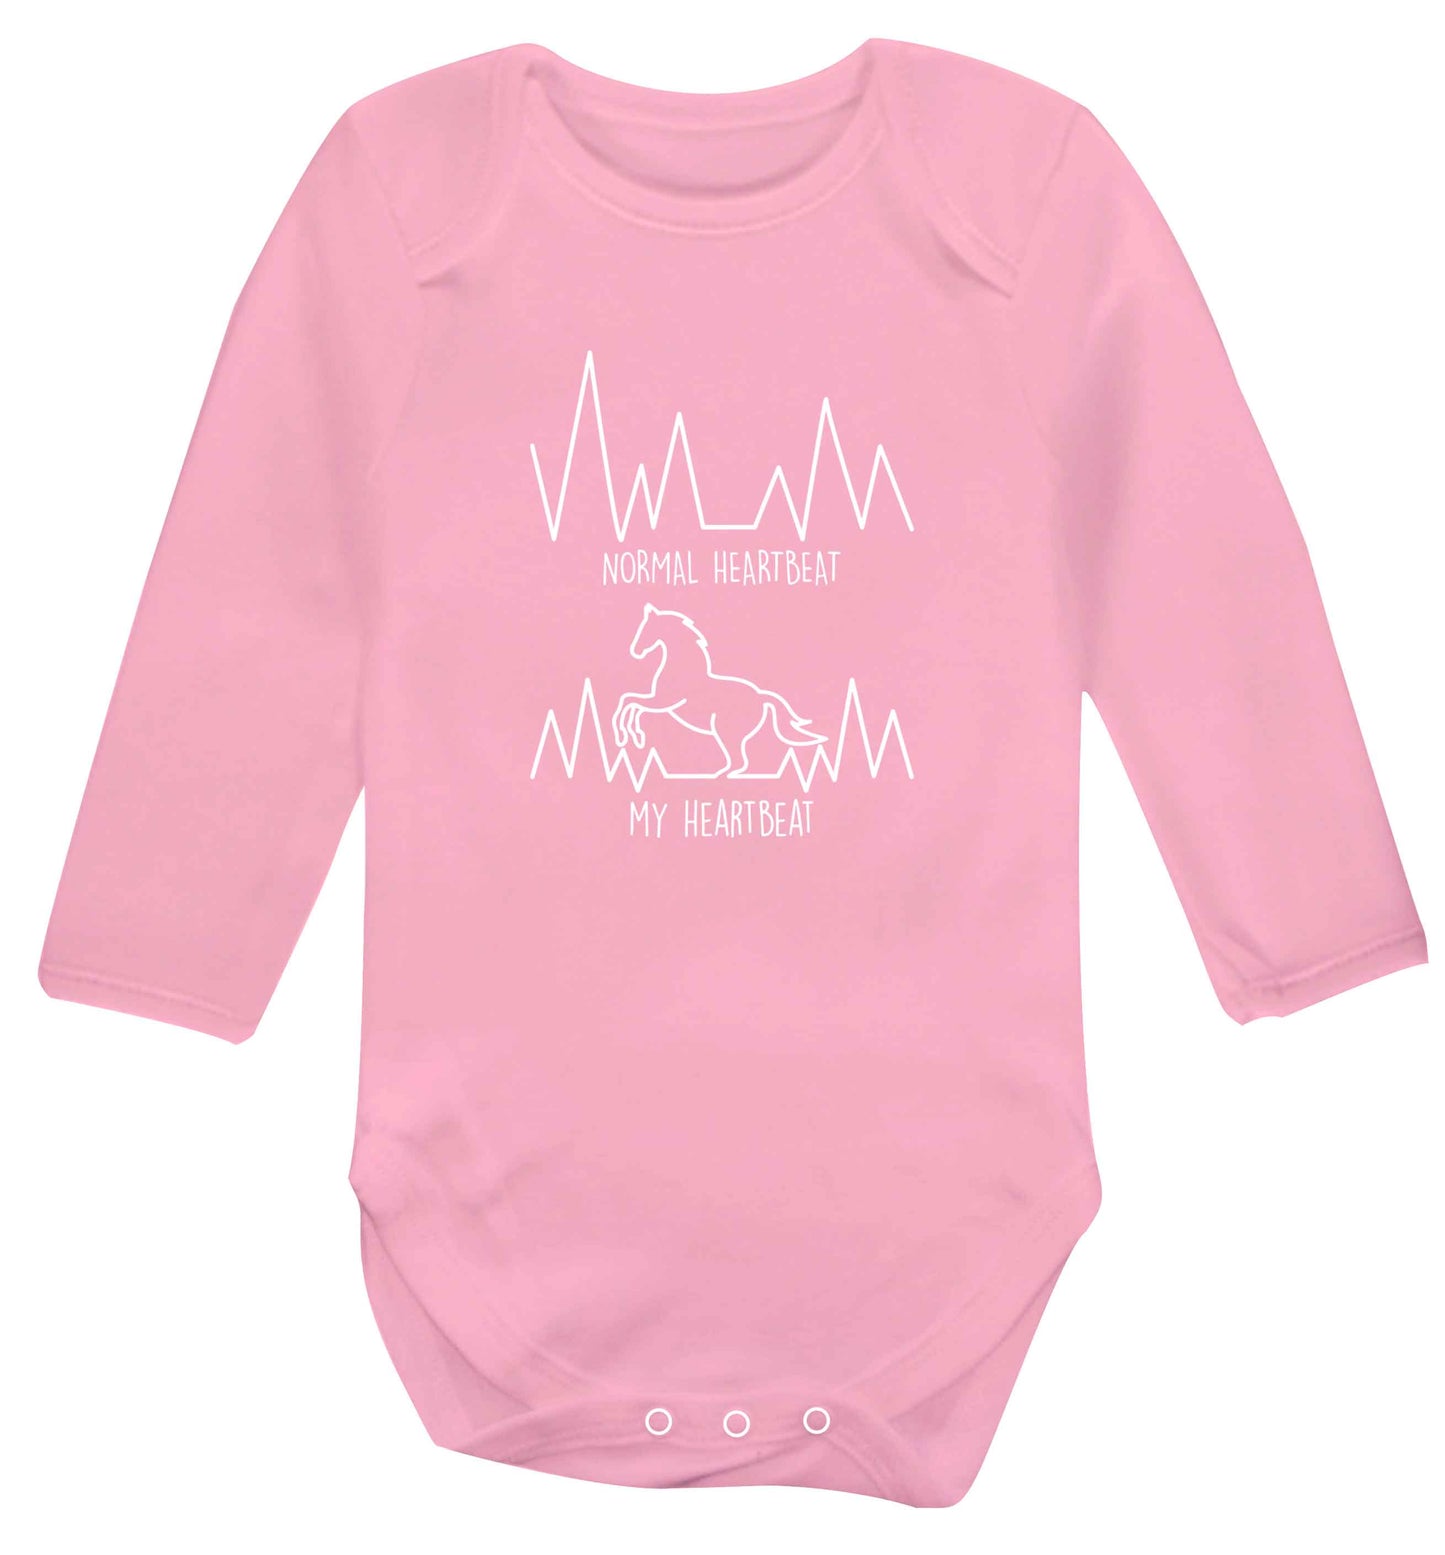 Horse - Normal heartbeat my heartbeat baby vest long sleeved pale pink 6-12 months